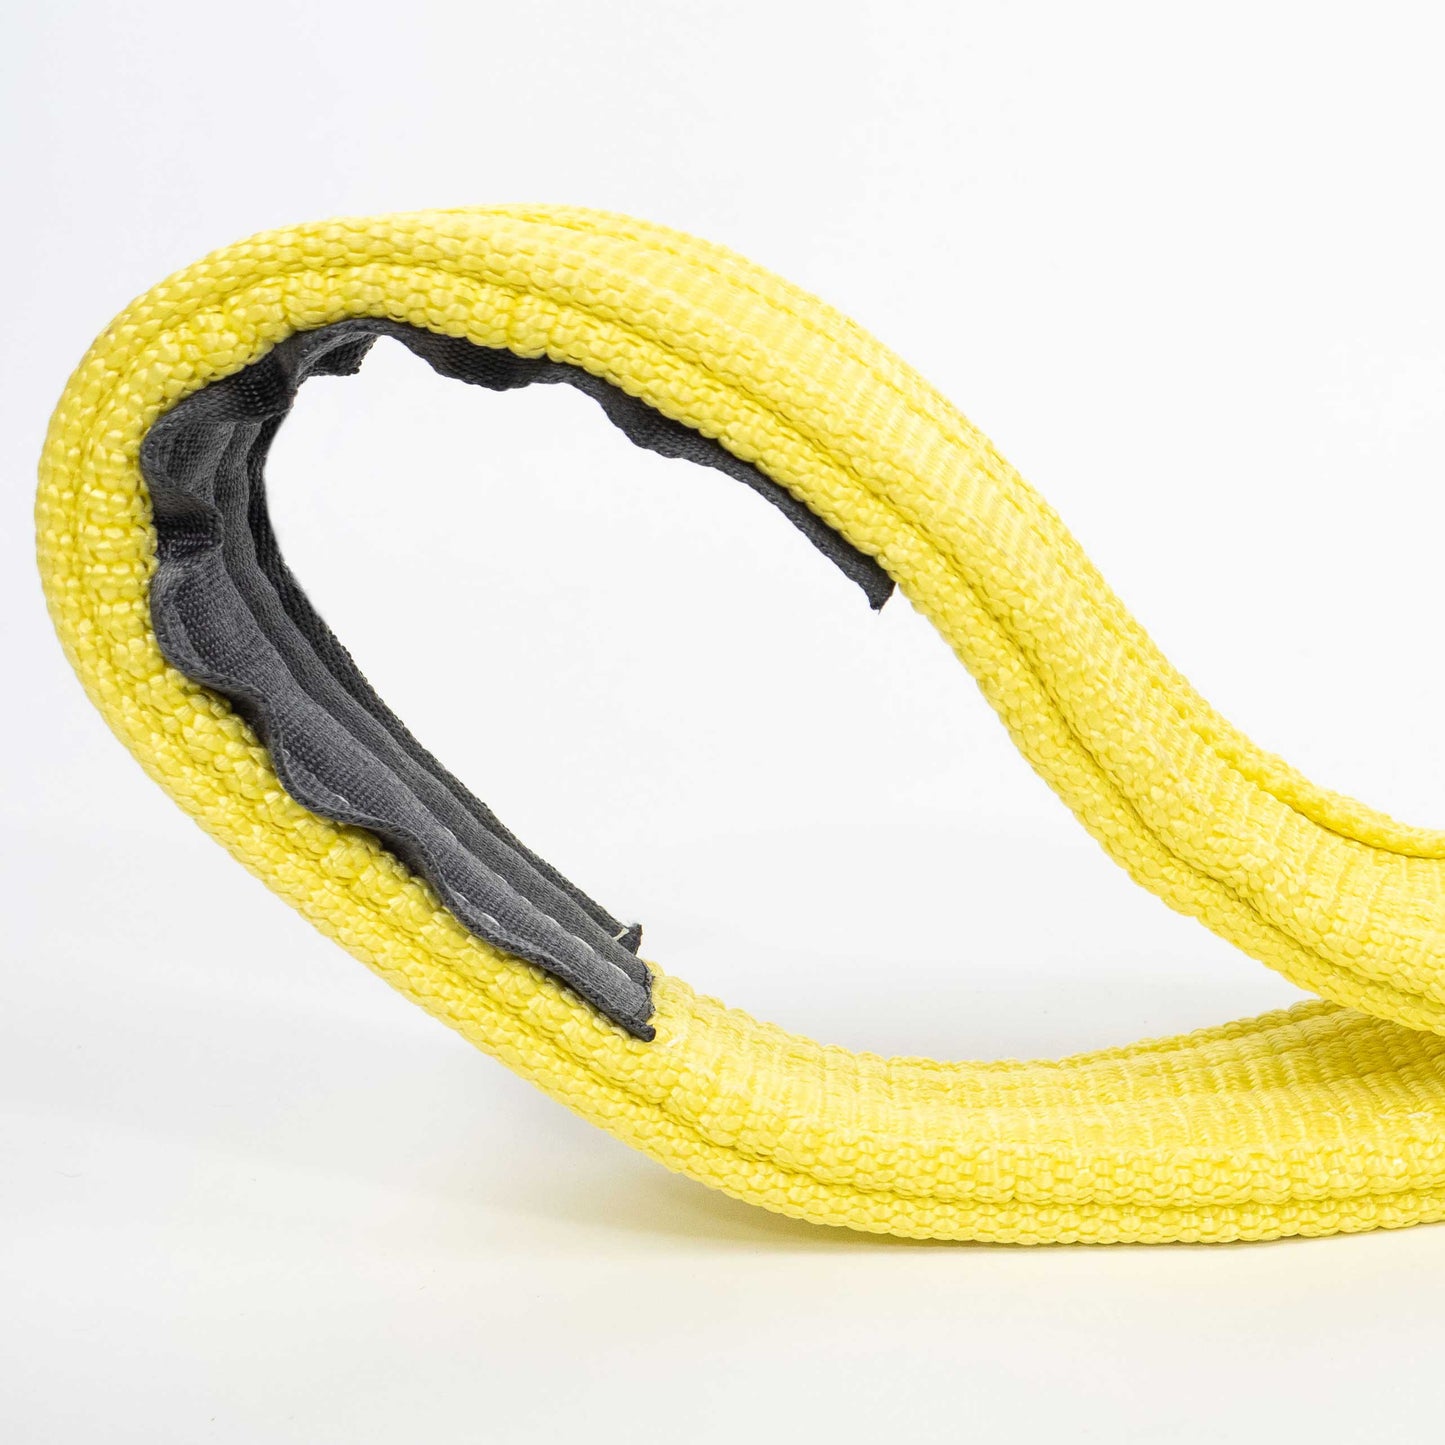 6" x 30' Heavy Duty Recovery Strap with Reinforced Cordura Eyes - 4 Ply | 76,500 WLL